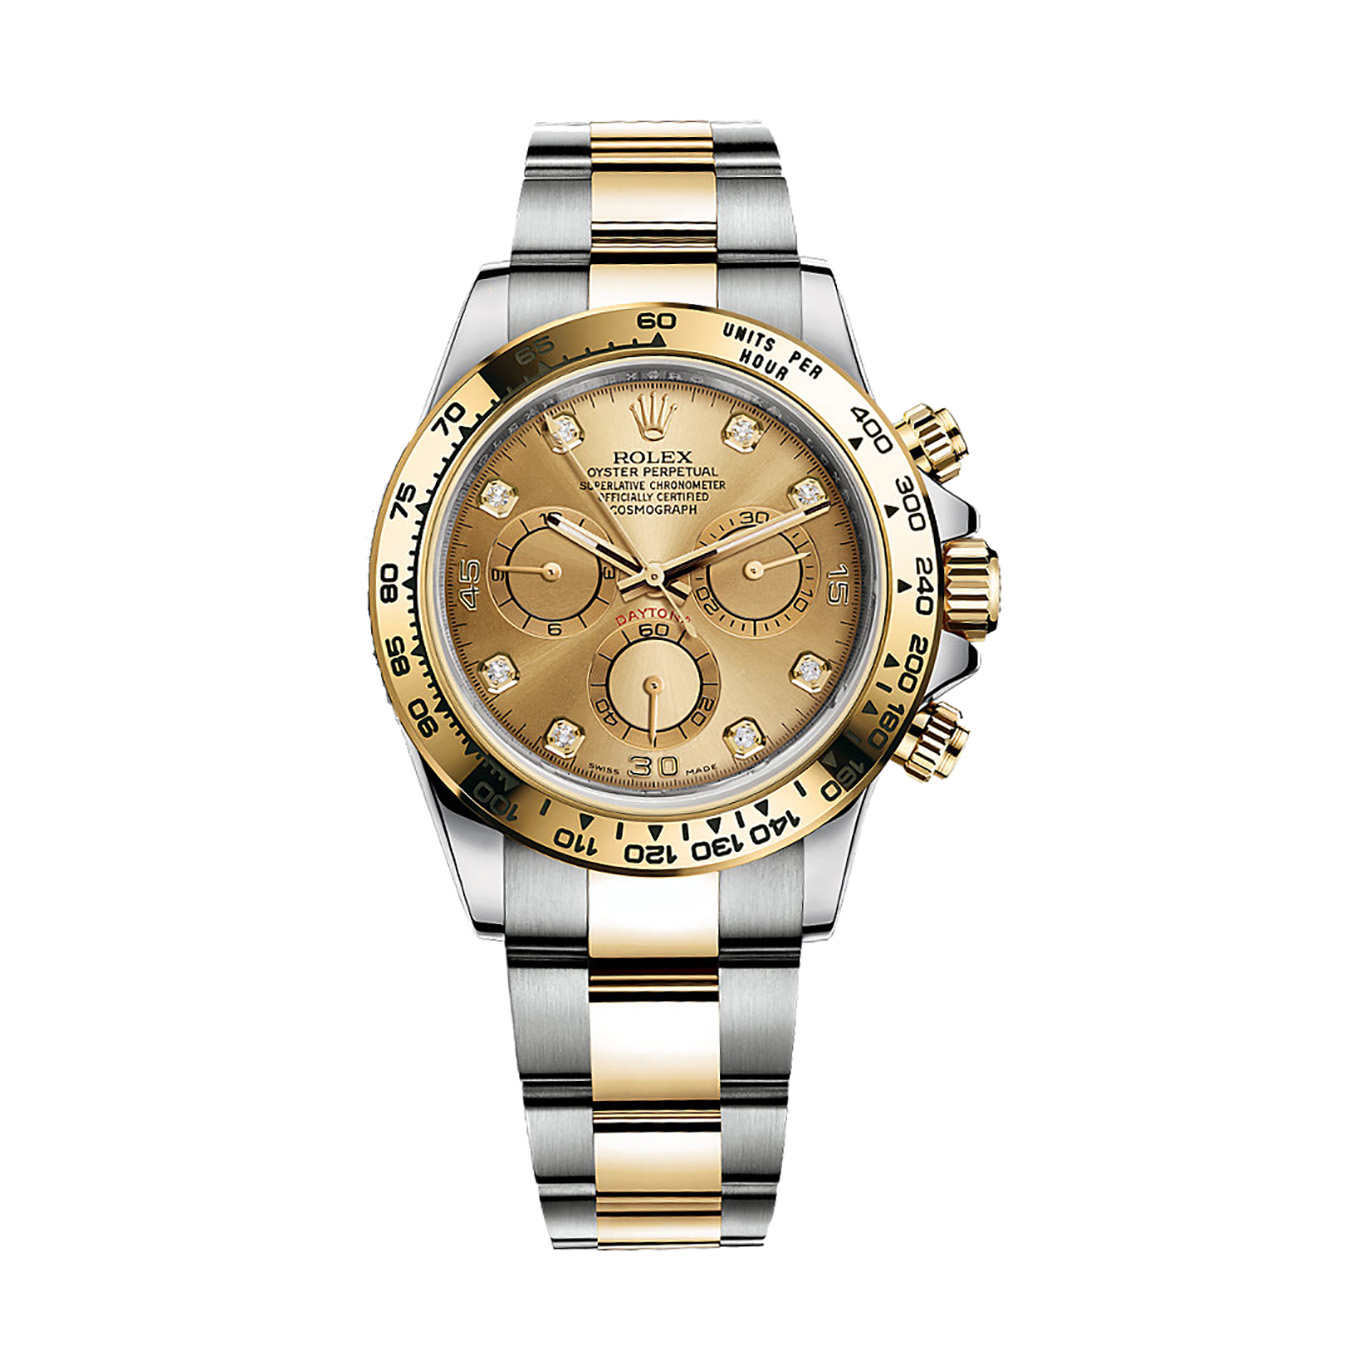 Cosmograph Daytona 116503 Gold & Stainless Steel Watch (Champagne Set With Diamonds)